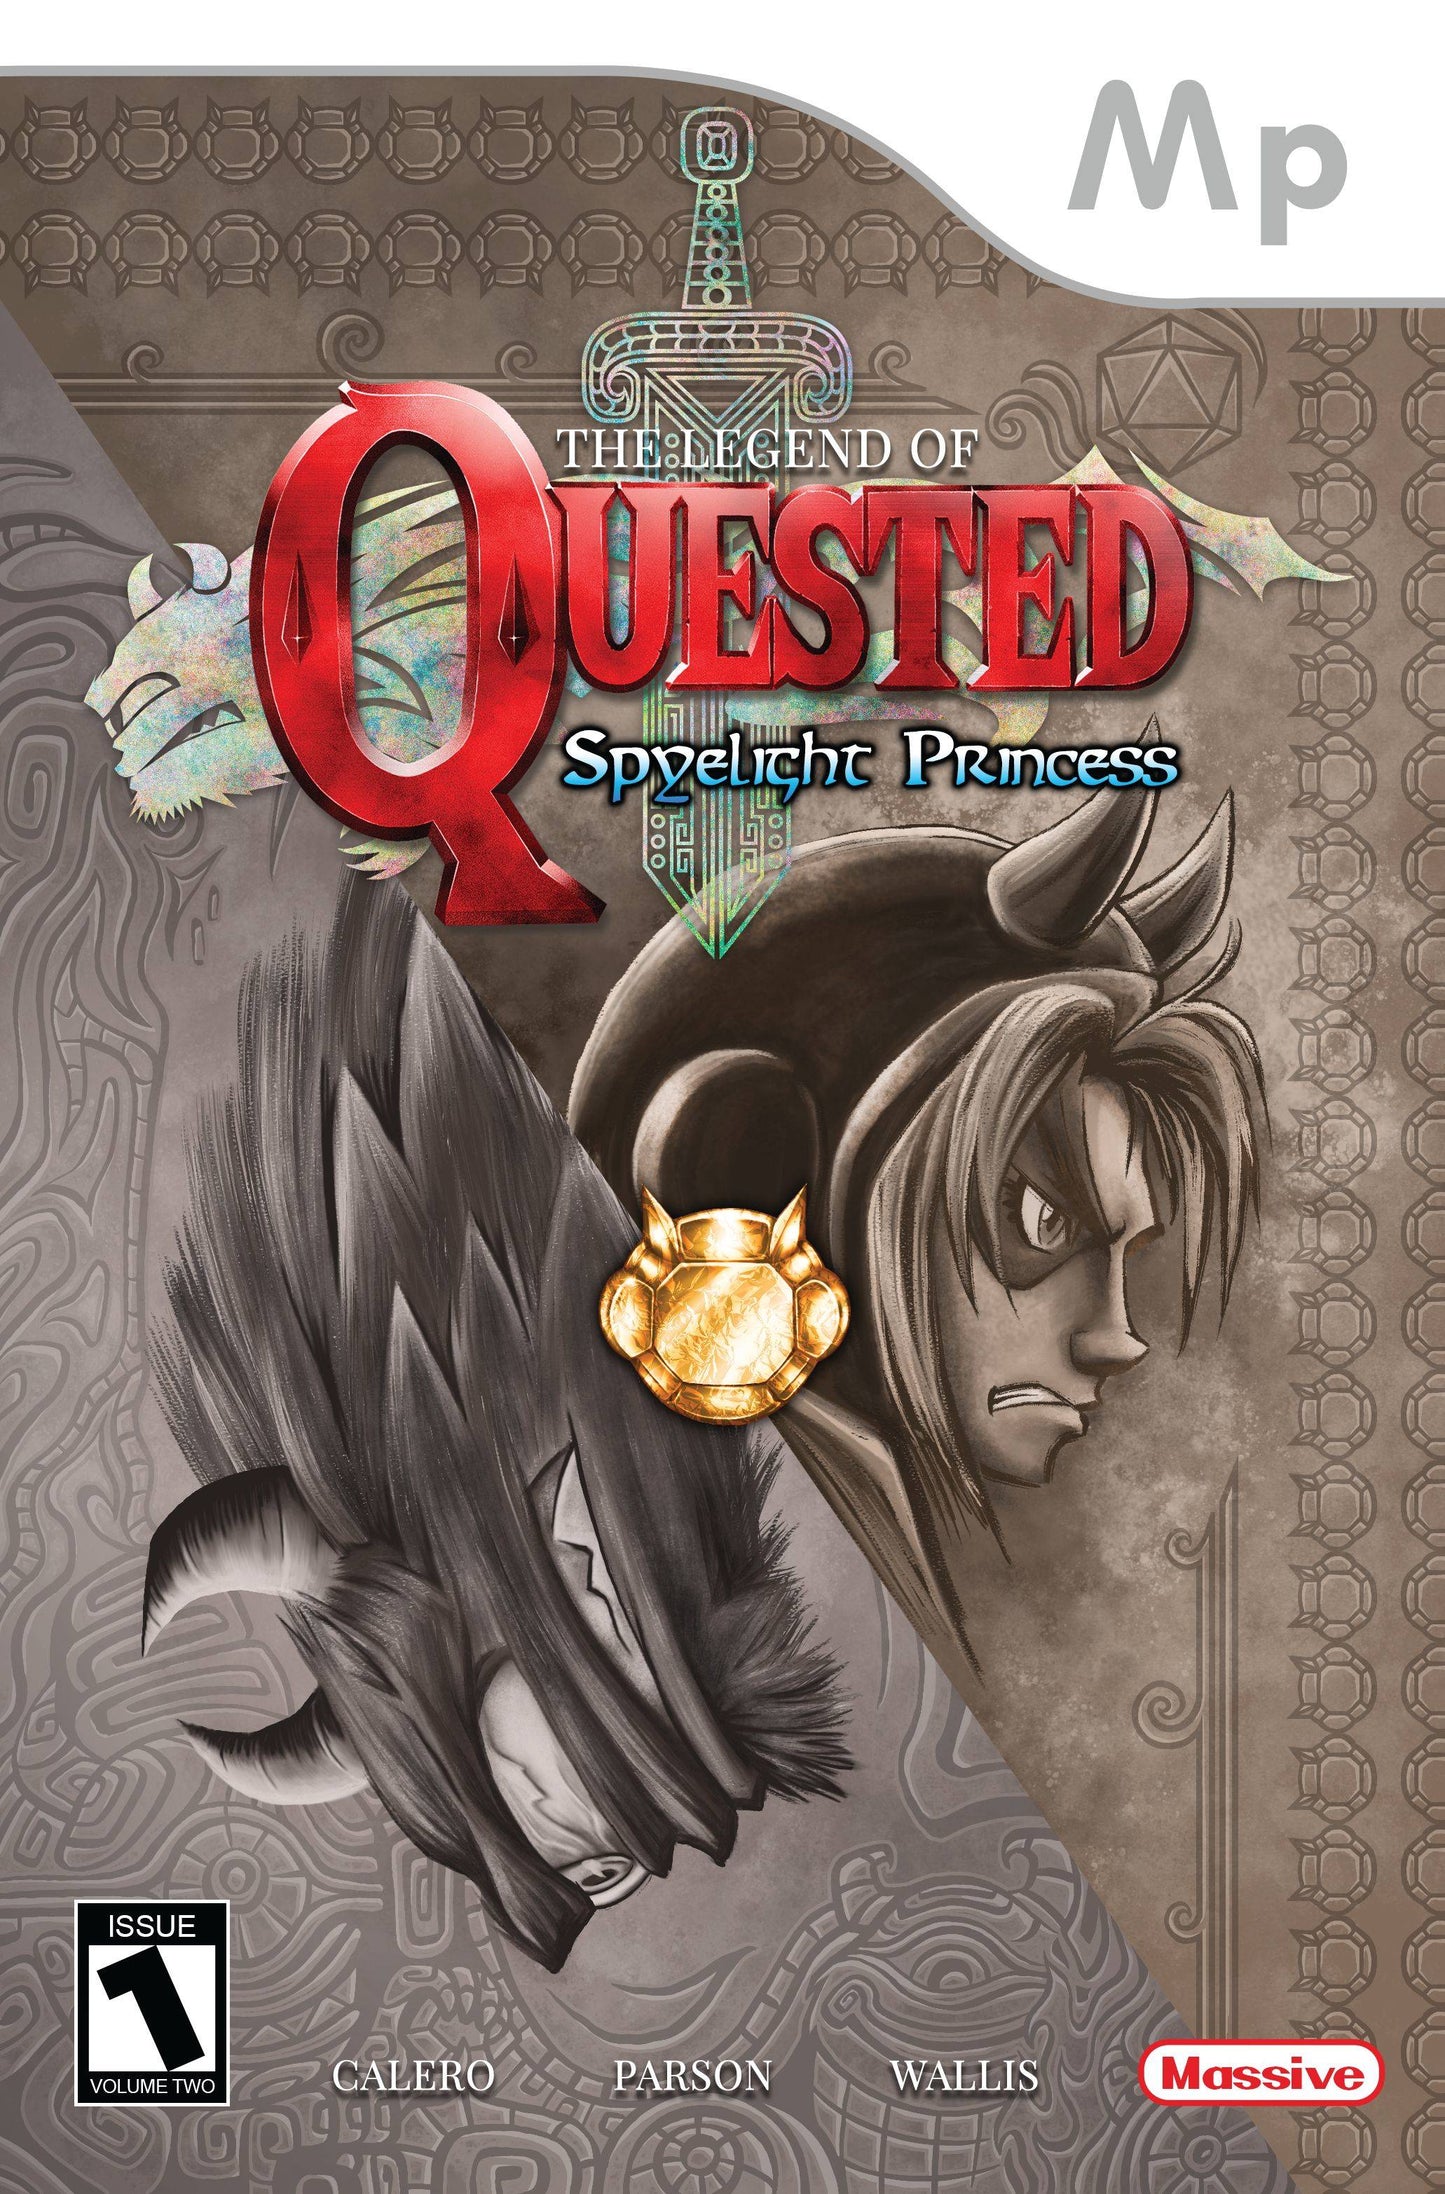 QUESTED VOL 2 #1 | CVR C VIDEO GAME HOMAGE